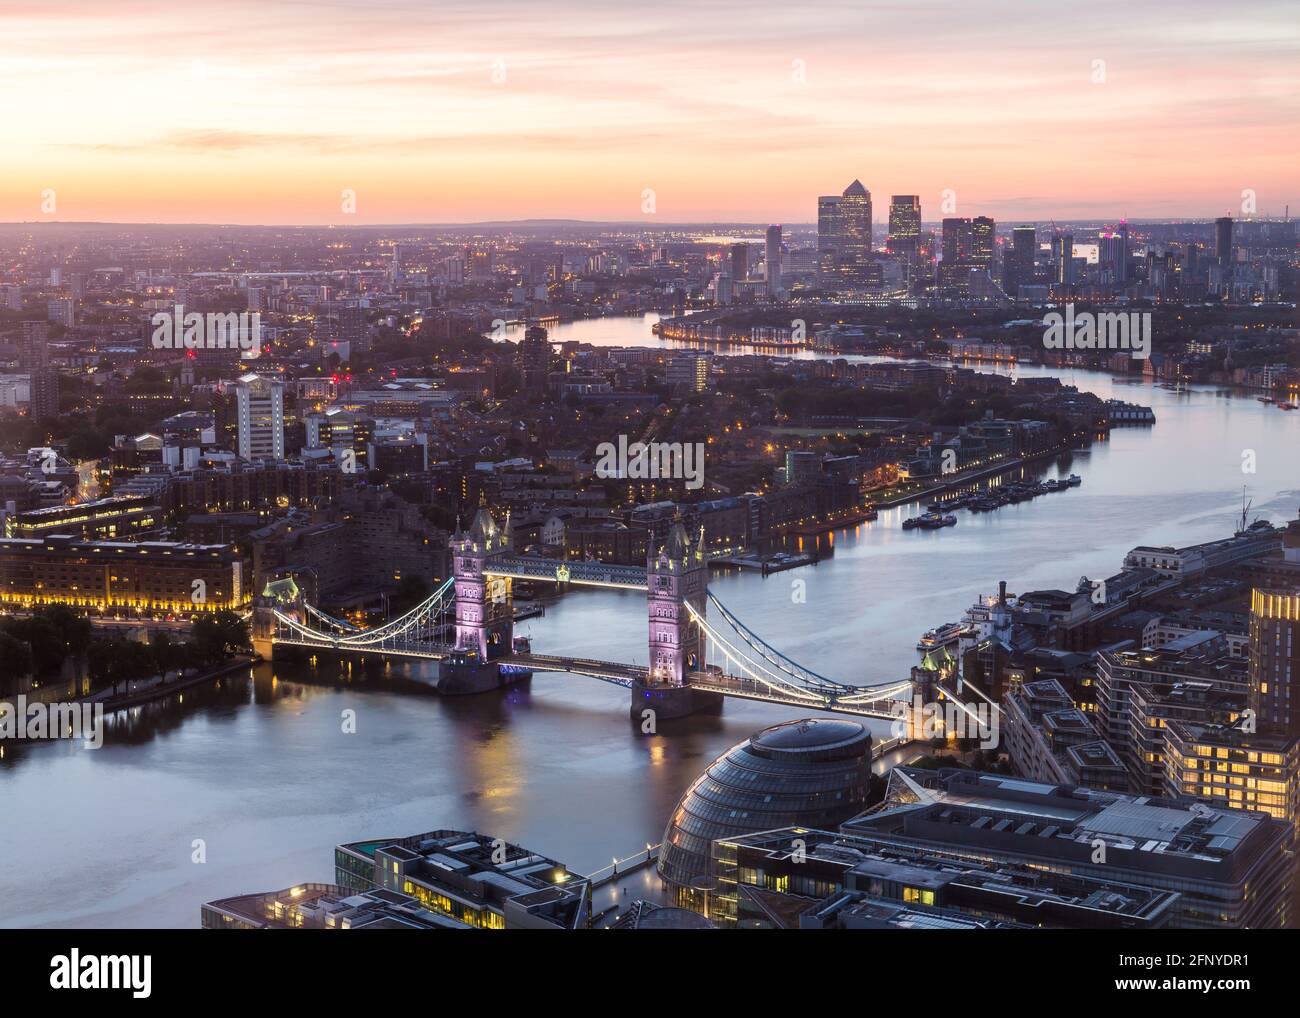 London Skyline at sunrise, showing architecture and a colourful sky Stock Photo